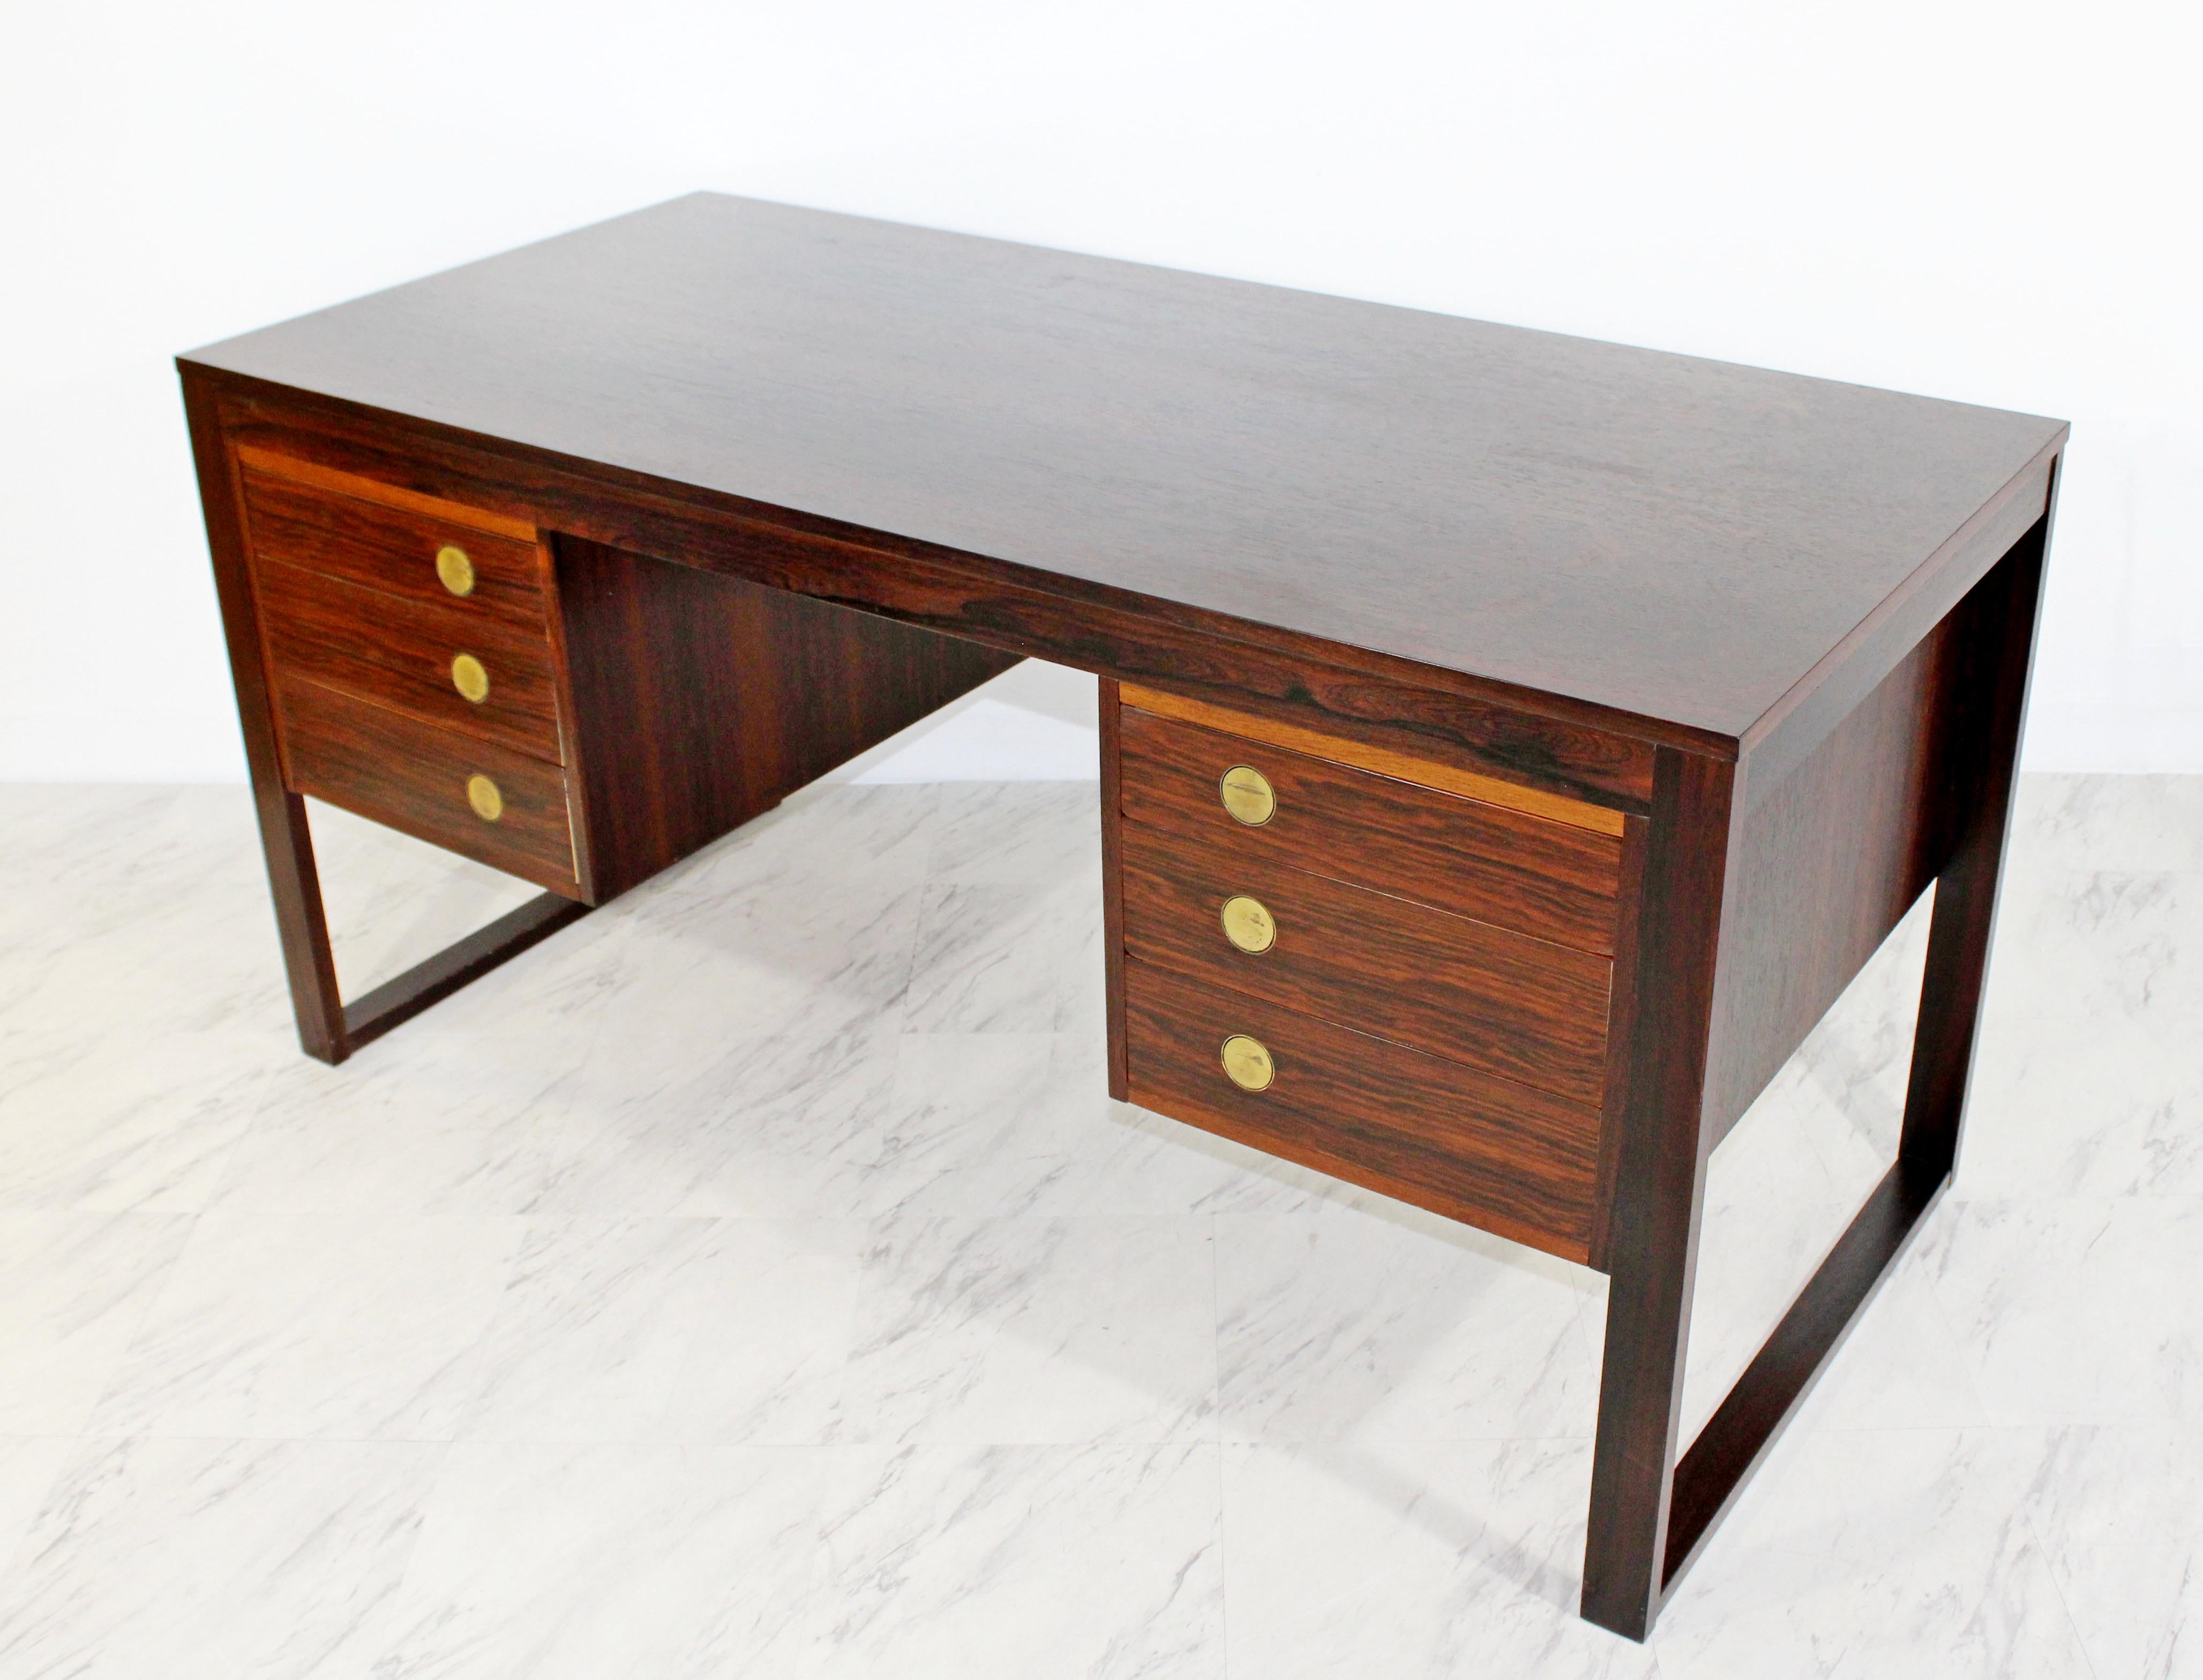 For your consideration is a ravishing, rosewood desk, with six drawers that have brass pulls, by Dyrlund Denmark, attributed to Gunni Omann, circa the 1960s. Has 2 open cabinets in the back for storage. Has unique disc-shaped brass pulls that lay